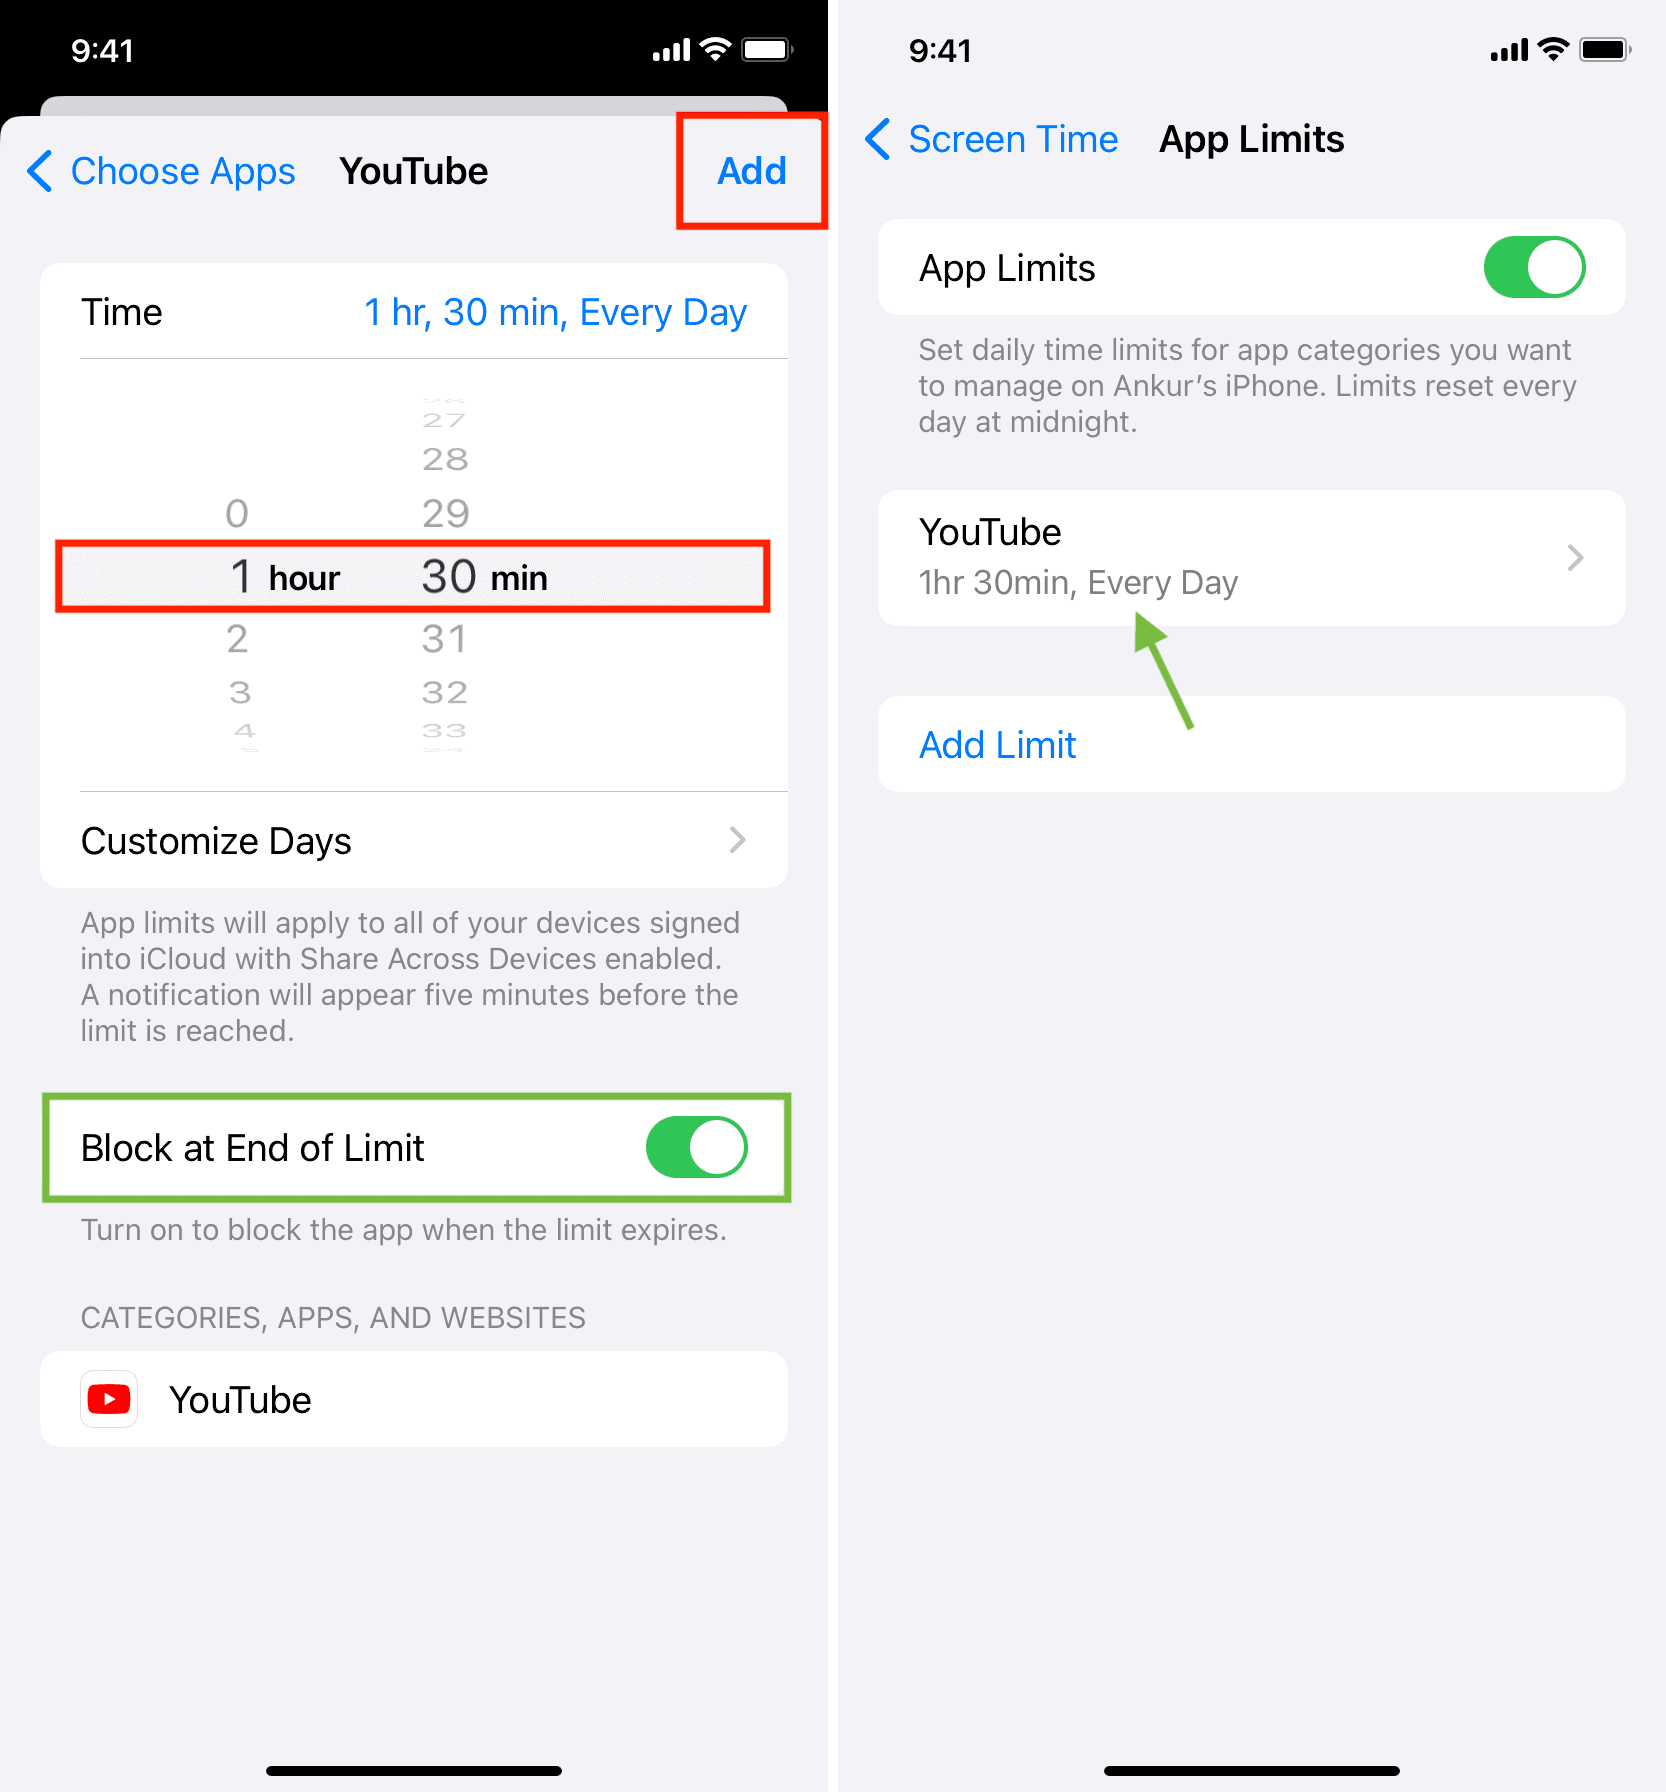 Add limit to YouTube and block at End of Limit on iPhone